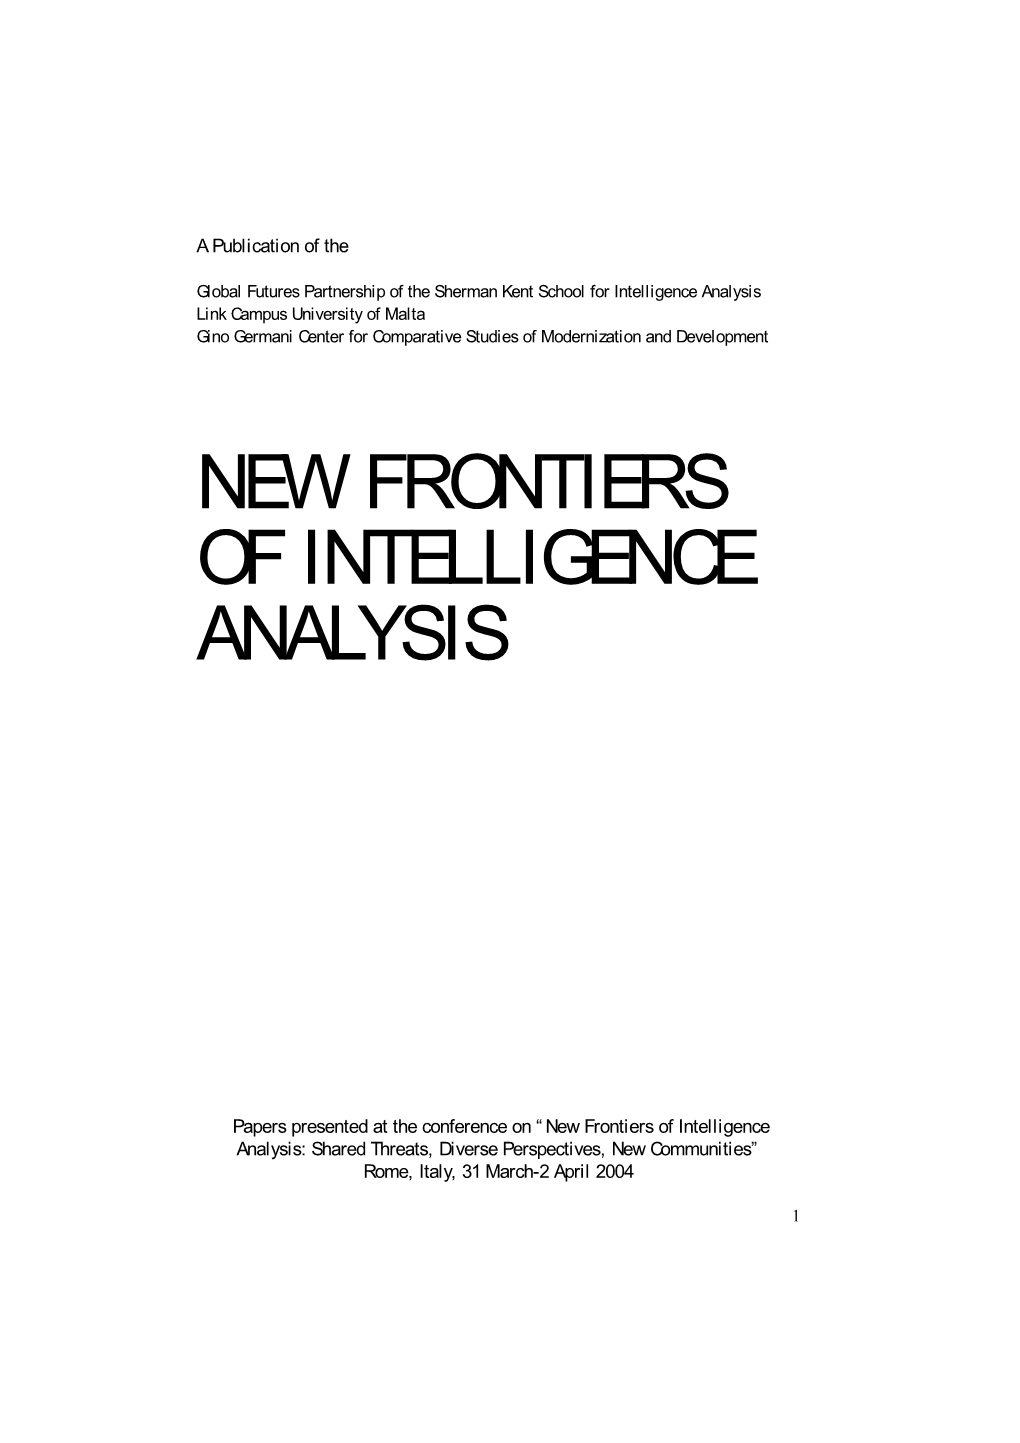 New Frontiers of Intelligence Analysis